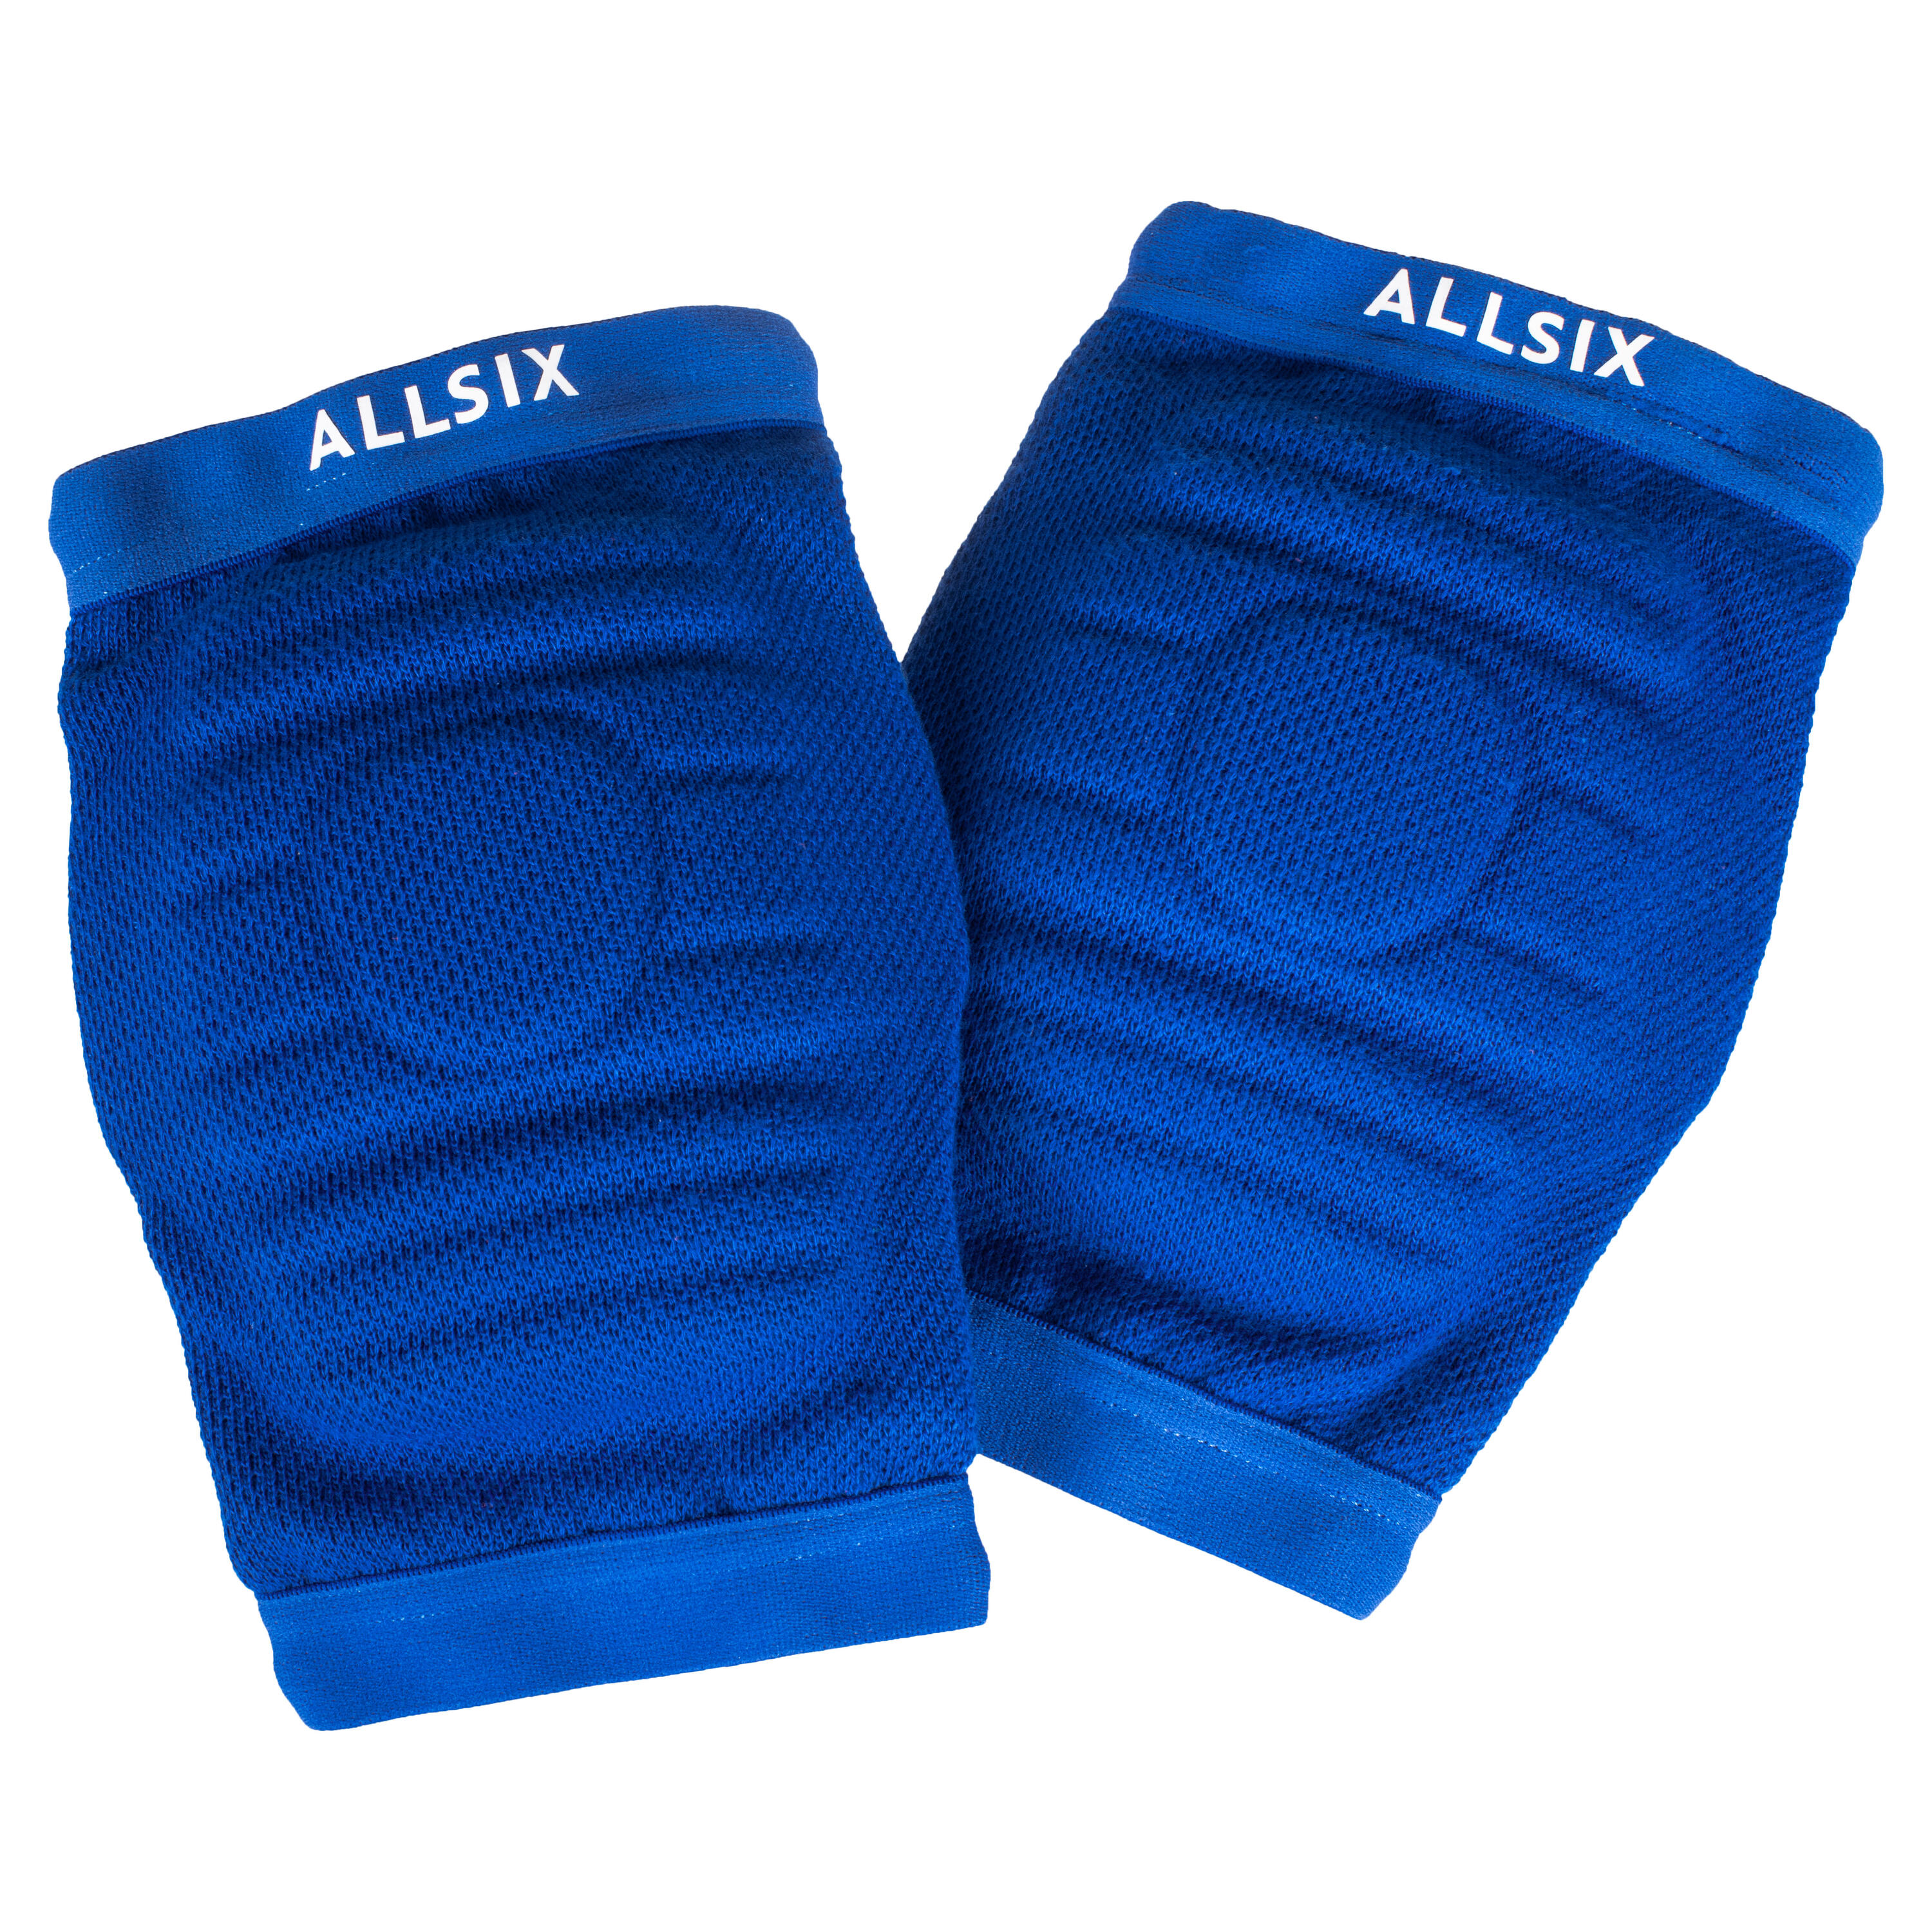 ALLSIX Volleyball Knee Pads VKP900 - Blue